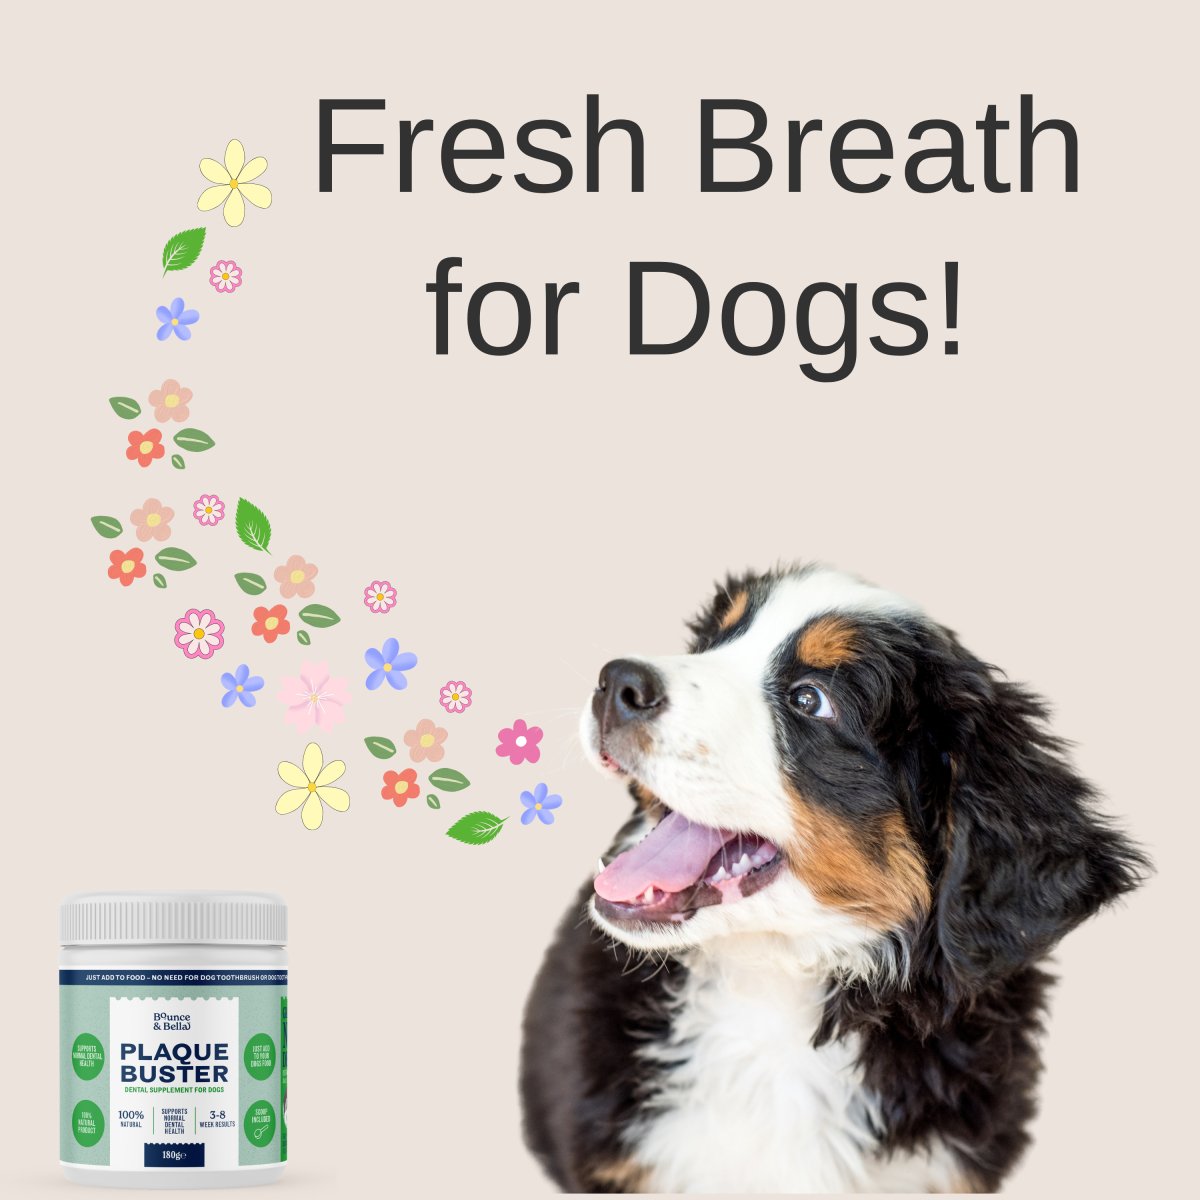 Plaque Buster - Tartar & Plaque Remover for Dogs | Dog Breath Freshene ...